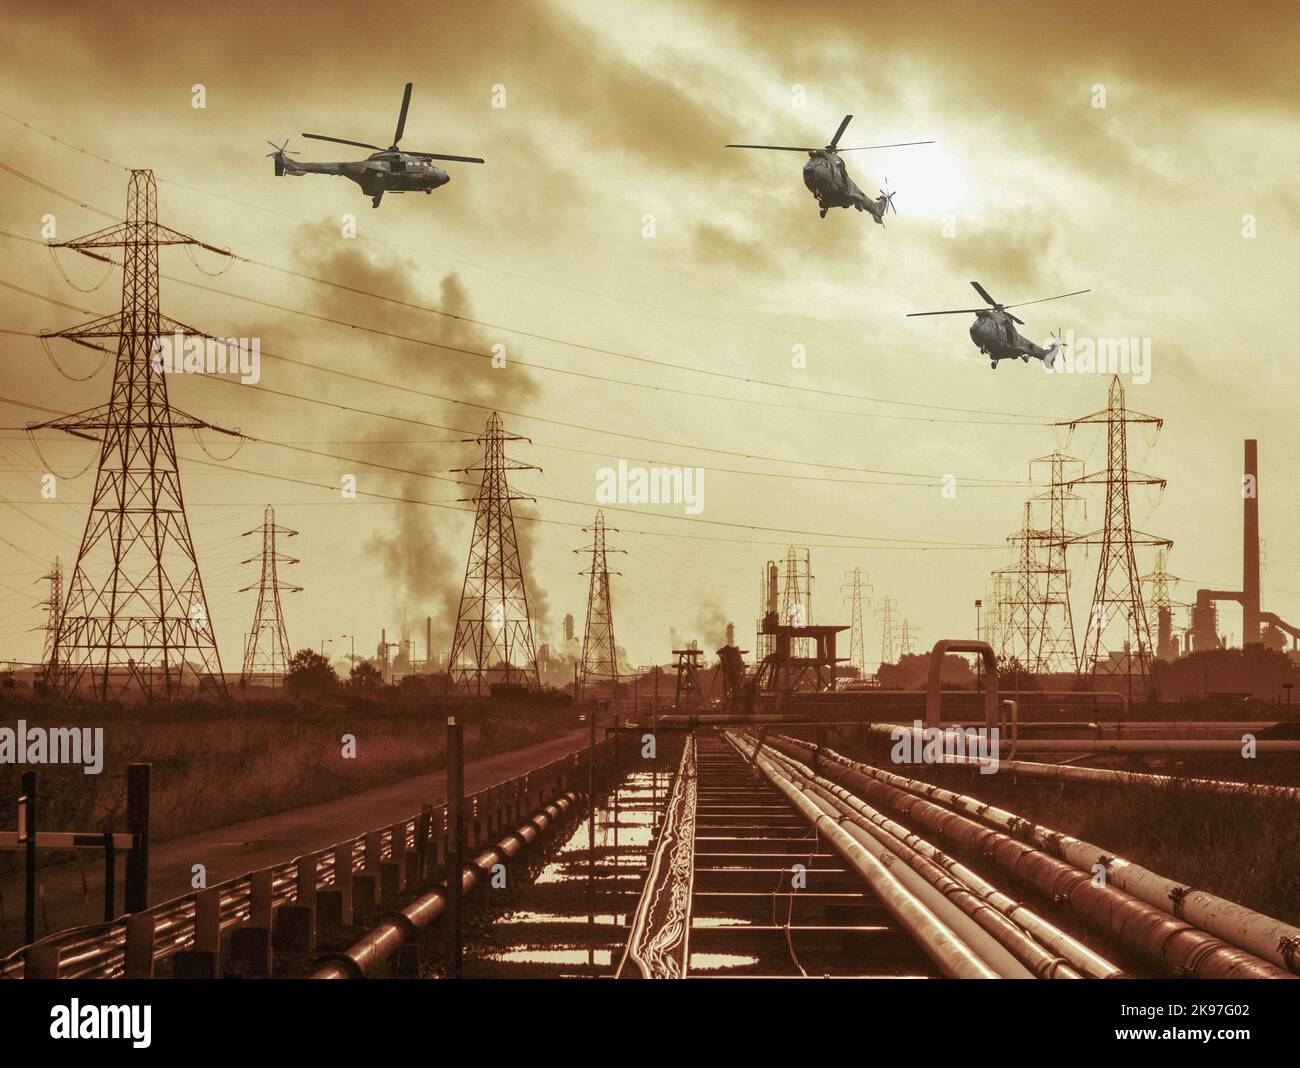 Military helicopters flying over gas/petrochemical complex. Ukraine, Russia war concept/composite image Stock Photo